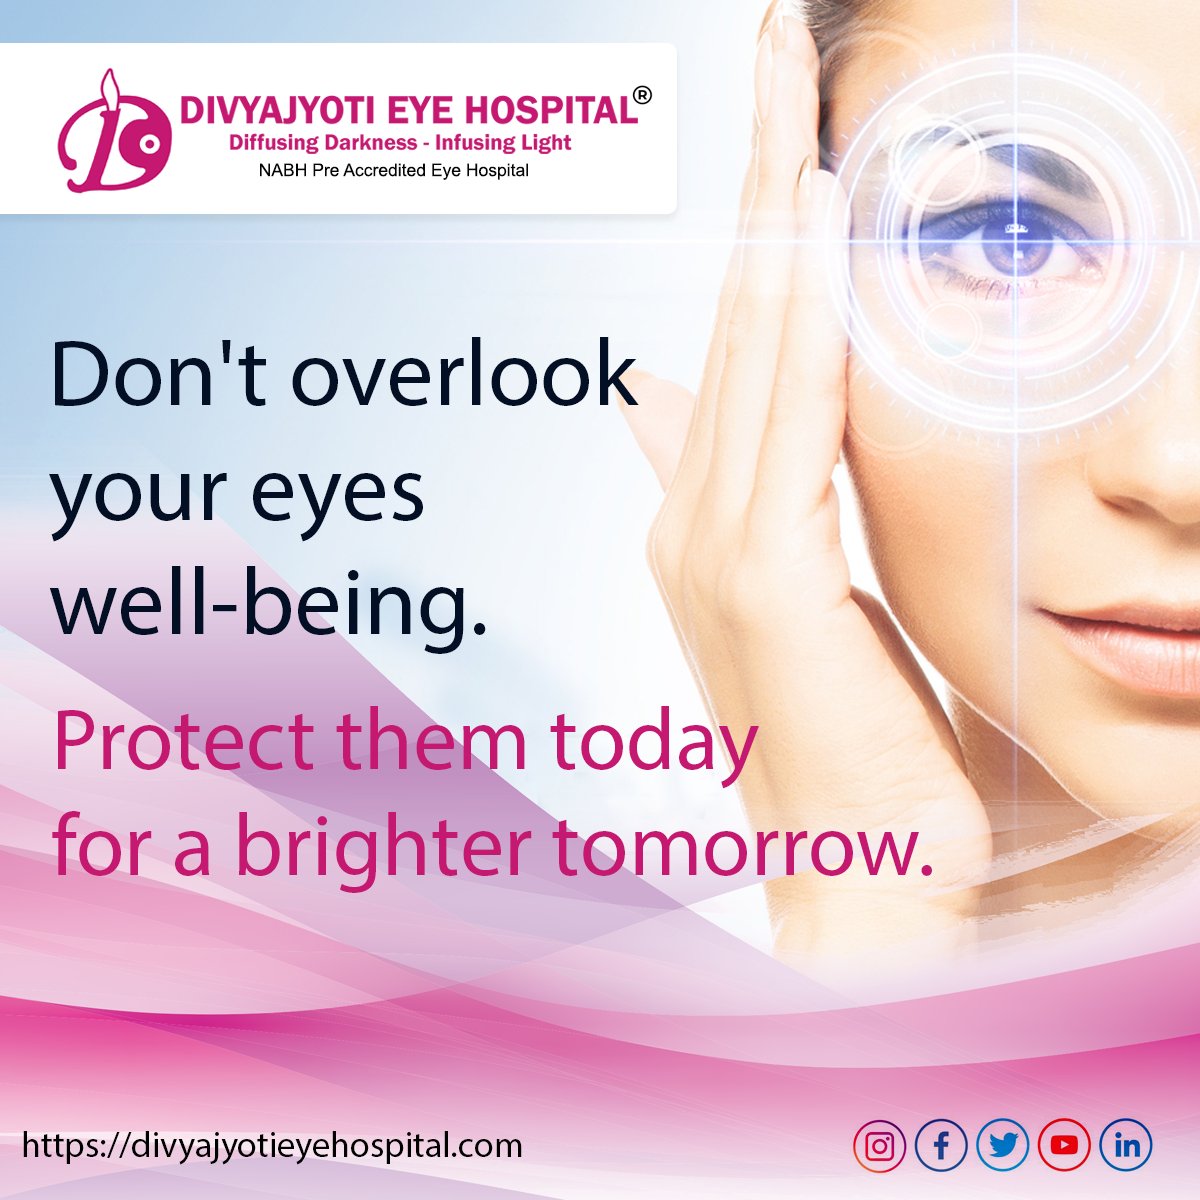 👀 Your eyes deserve the best care. Don't neglect their well-being and protect them today for a brighter tomorrow. ✨🔒

#EyeHealth #EyeProtection #EyeCareMatters #HealthyEyes #BrightFuture #EyeWellness #PrioritizeYourVision #ProtectAndPreserve